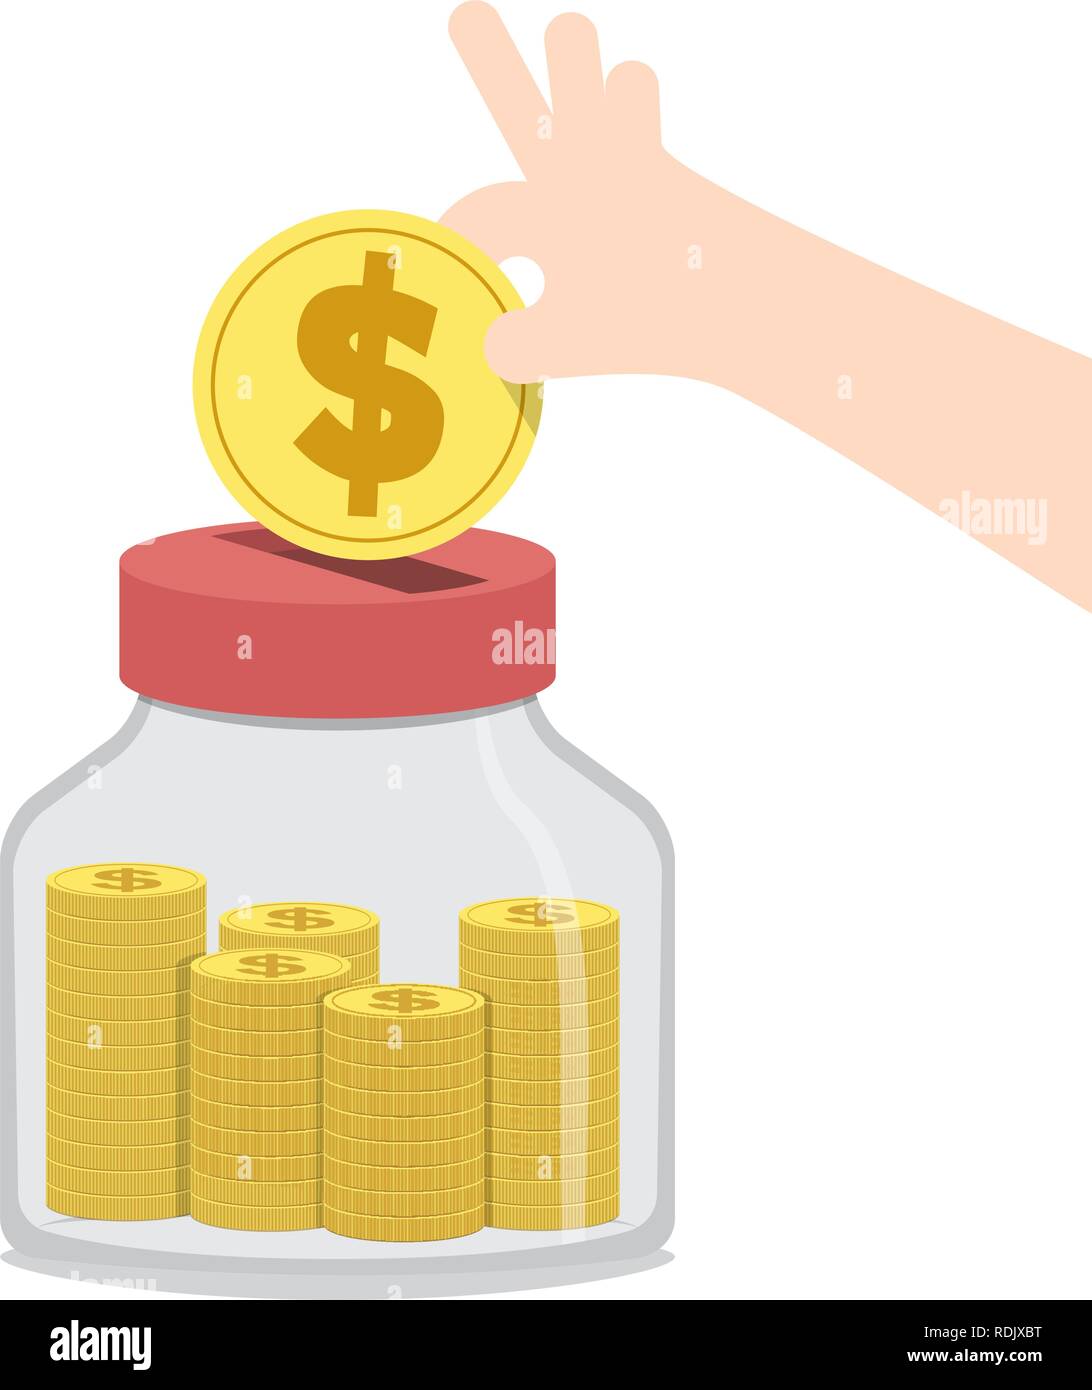 Illustration vector saving money and spending with jar. Finance Concept. Stock Vector